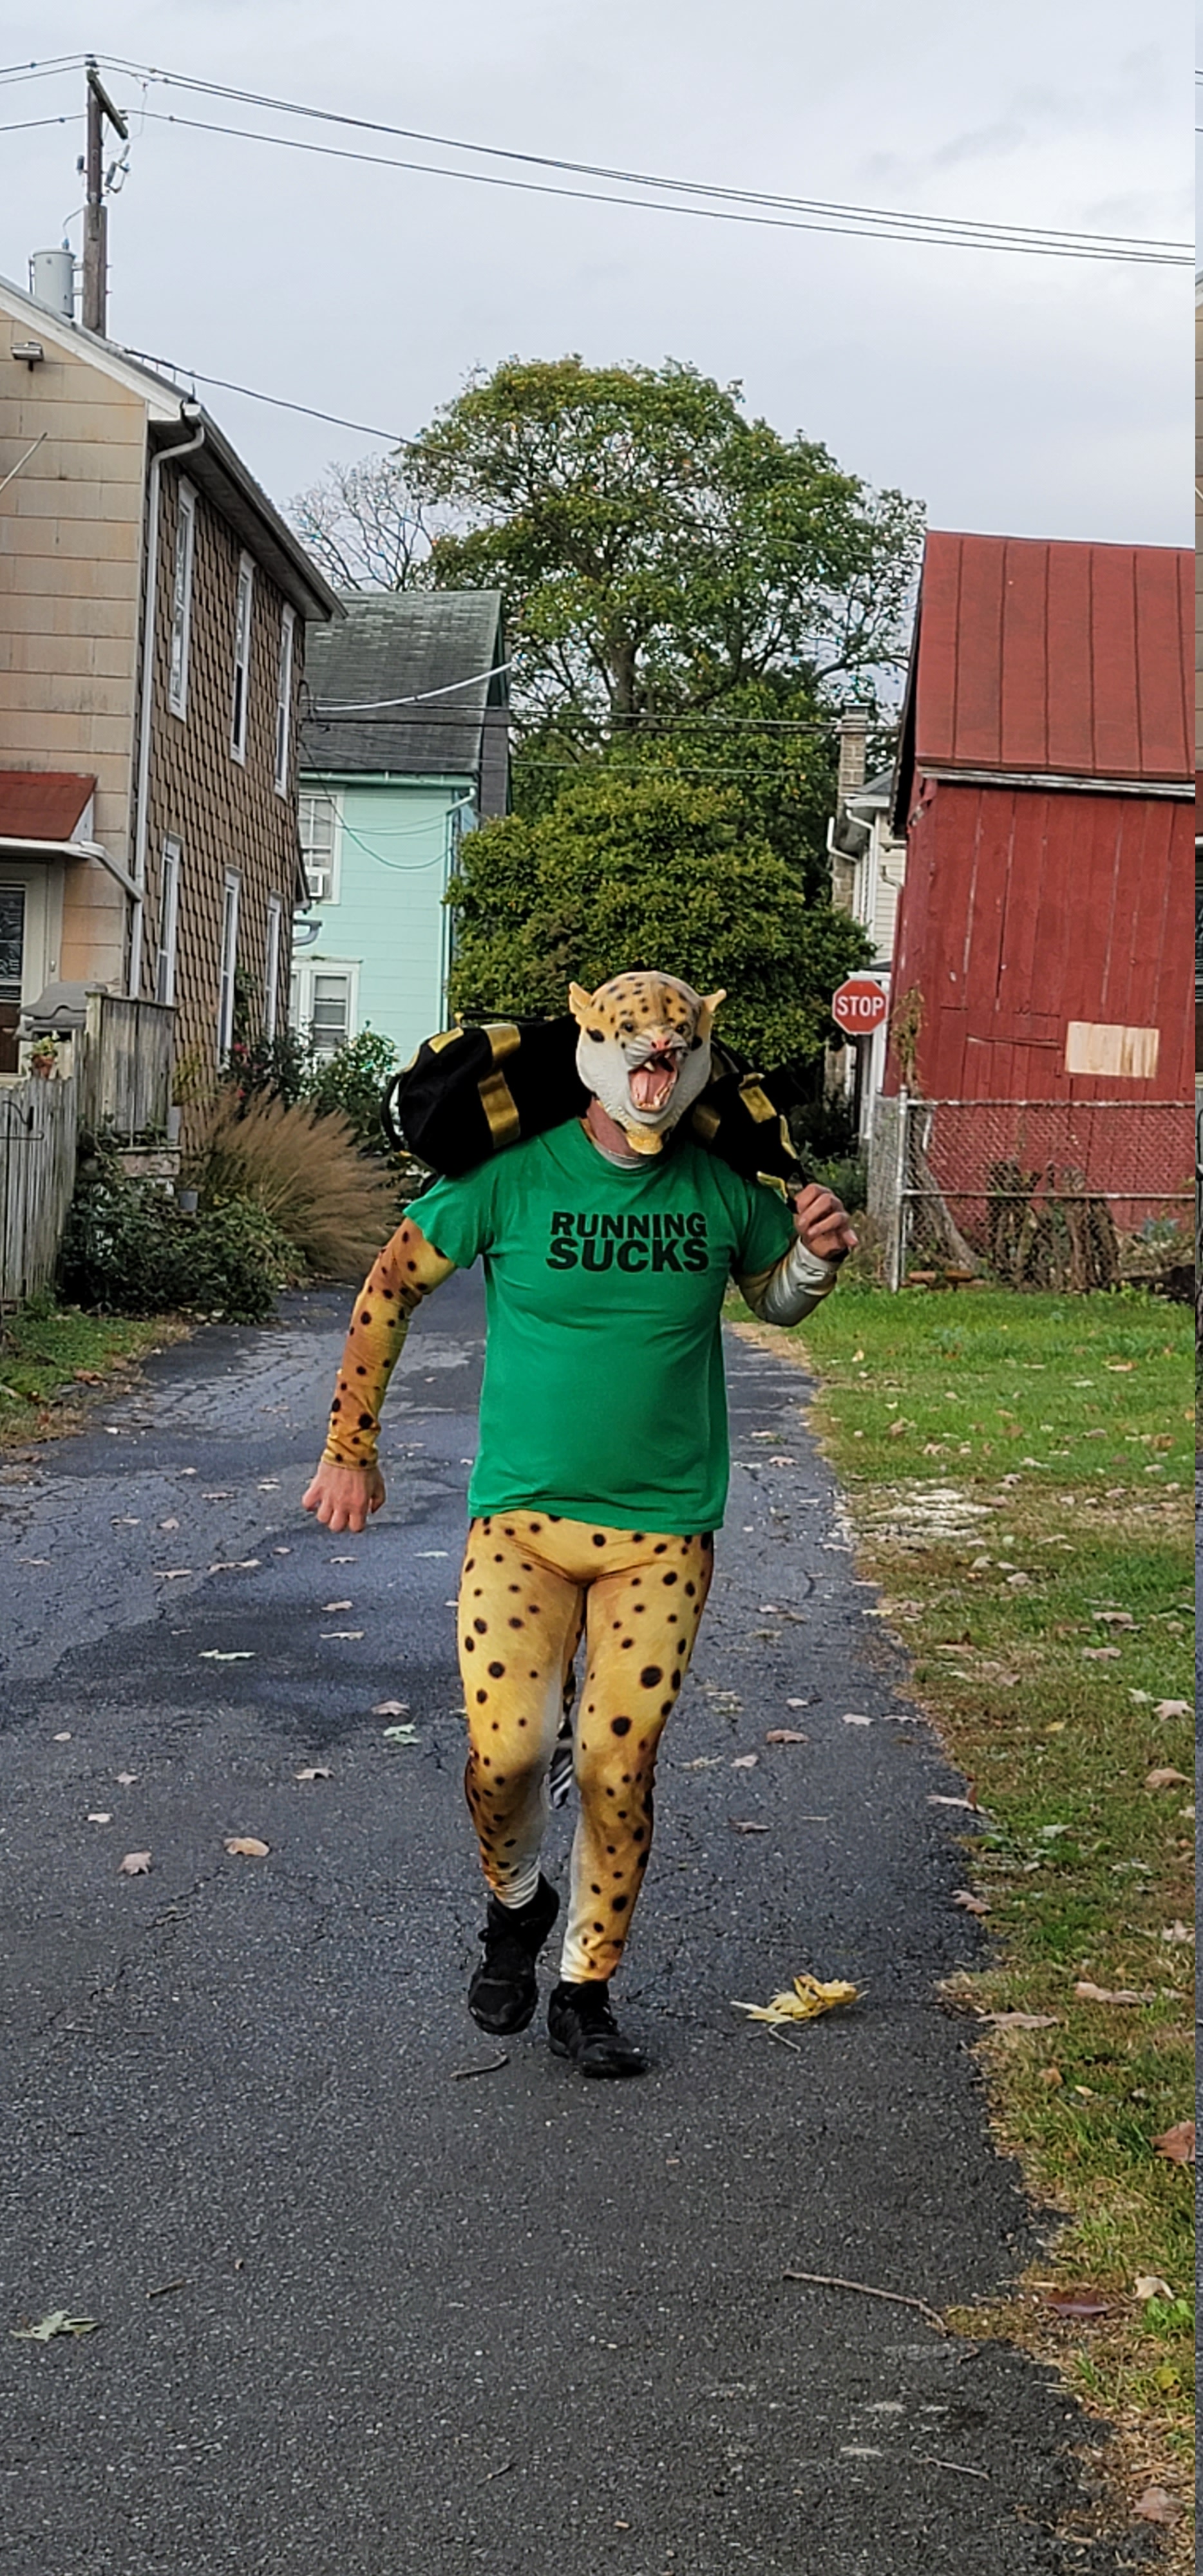 This is a picture of me running with a sandbag on my shoulder. I have my cheetah costume on with a cheetah mask. My tshirt that I am wearing over it says 